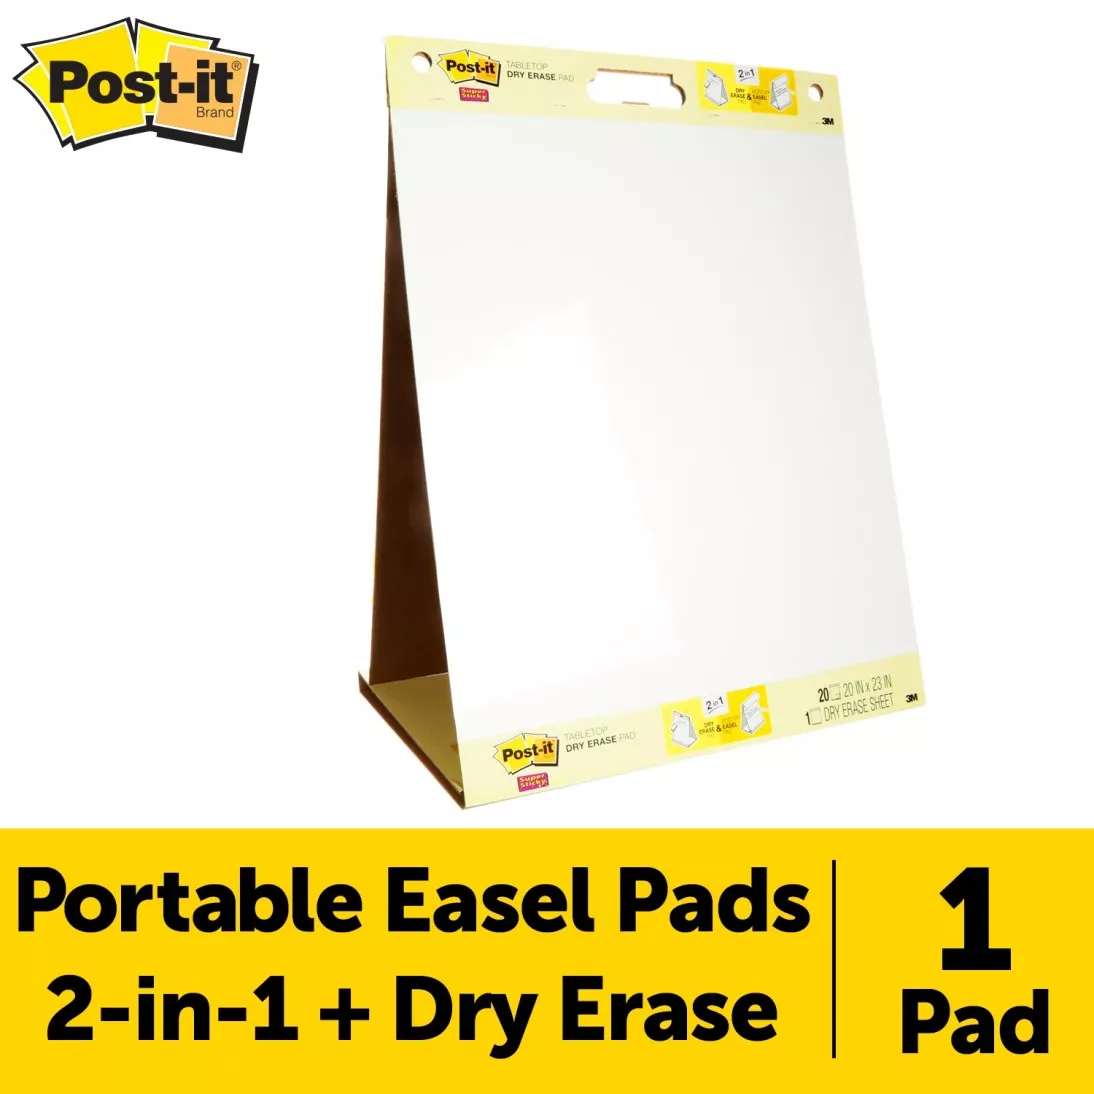 Post-it® Super Sticky Tabletop Easel Pad with Dry Erase 563 DE, 20 in. x
23 in.